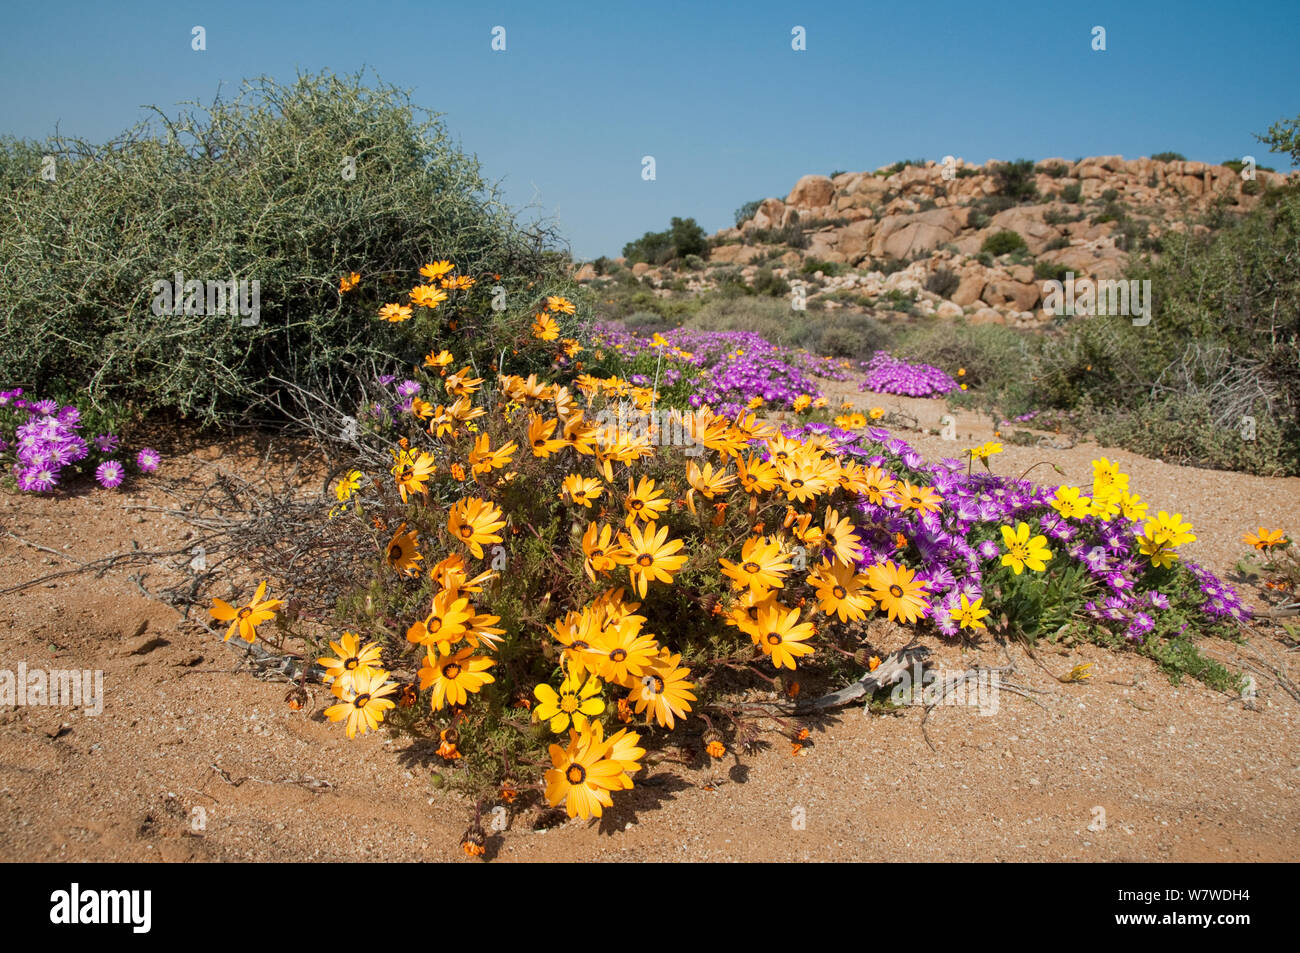 Daisies (Dimorphotheca sinuata) and Ice plants ( Drosanthemum hispidum) in flower, Goegap Nature Reserve, Namaqualand, South Africa, August. Stock Photo